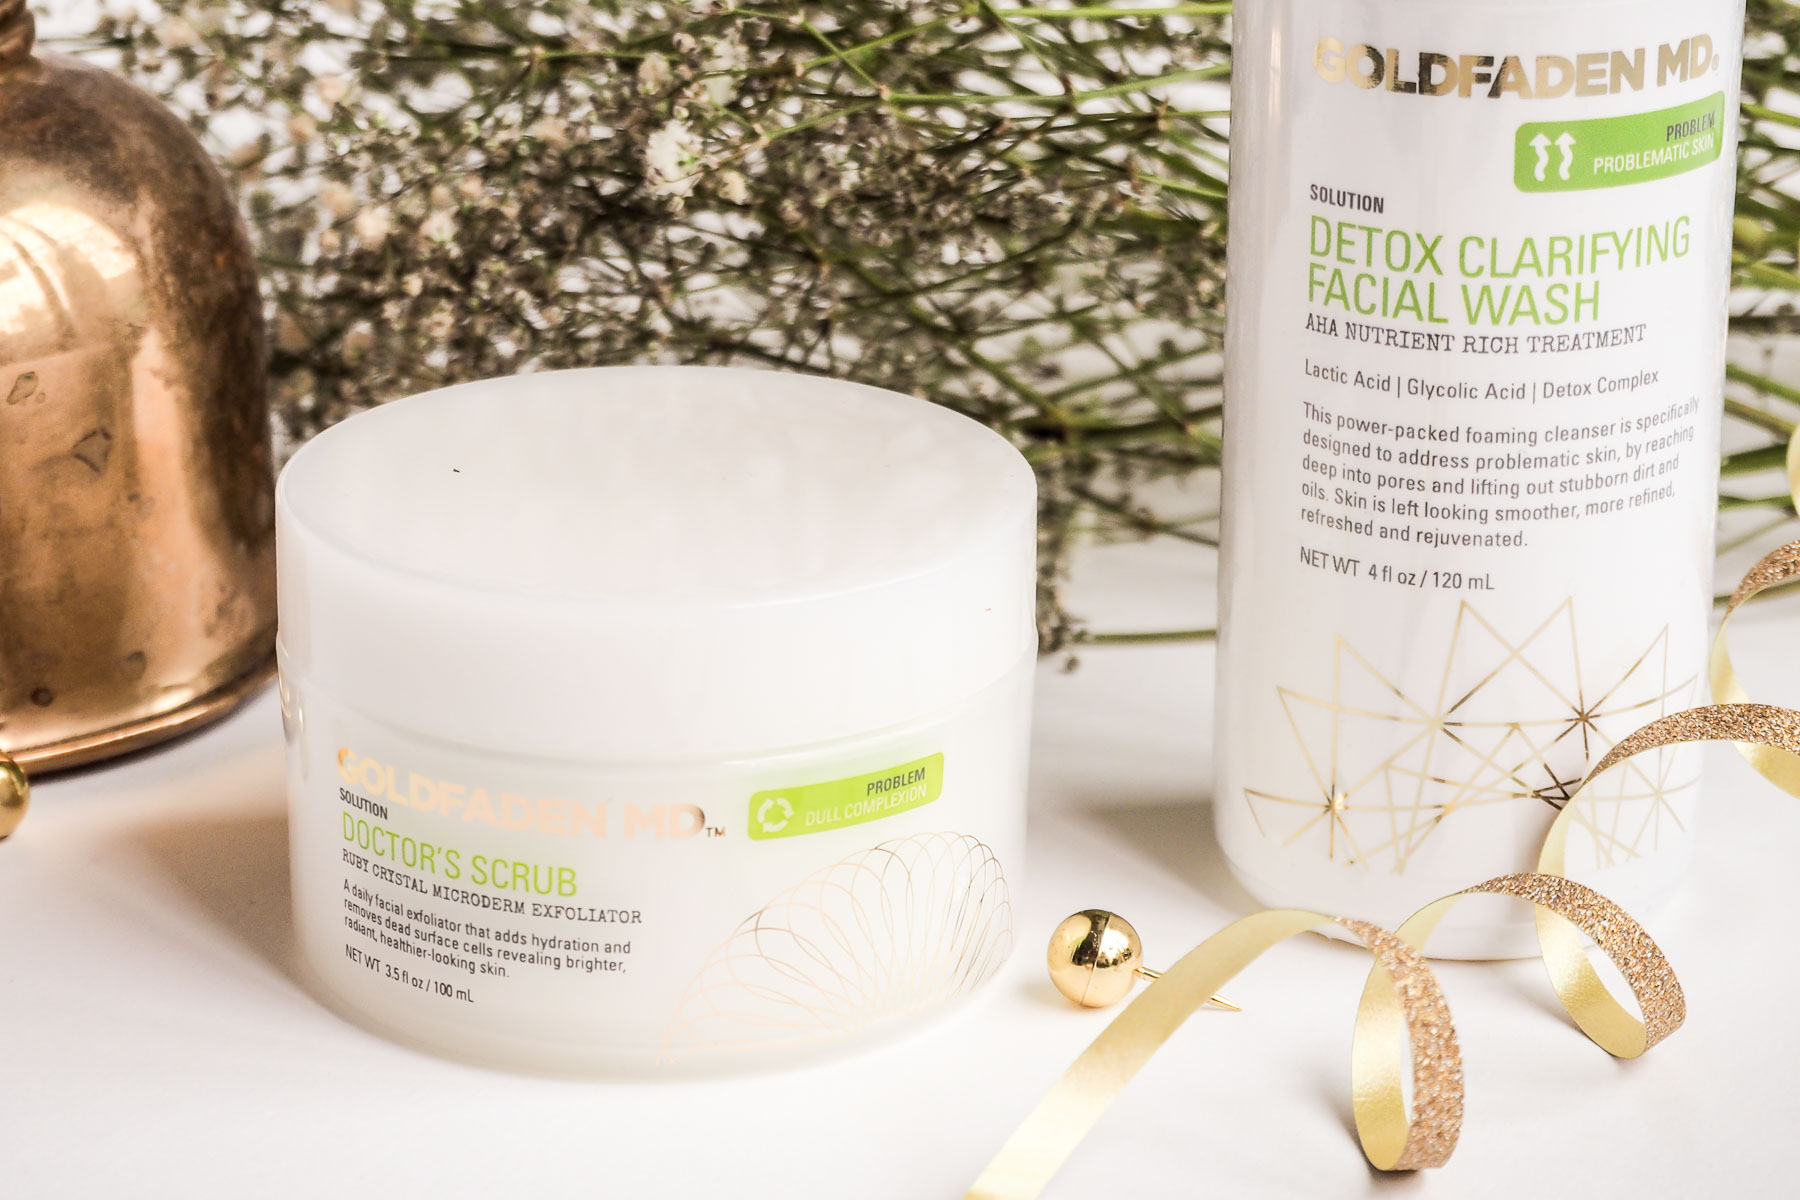 Beauty Review: Goldfaden MD Doctor’s Scrub and Detox Clarifying Facial Wash